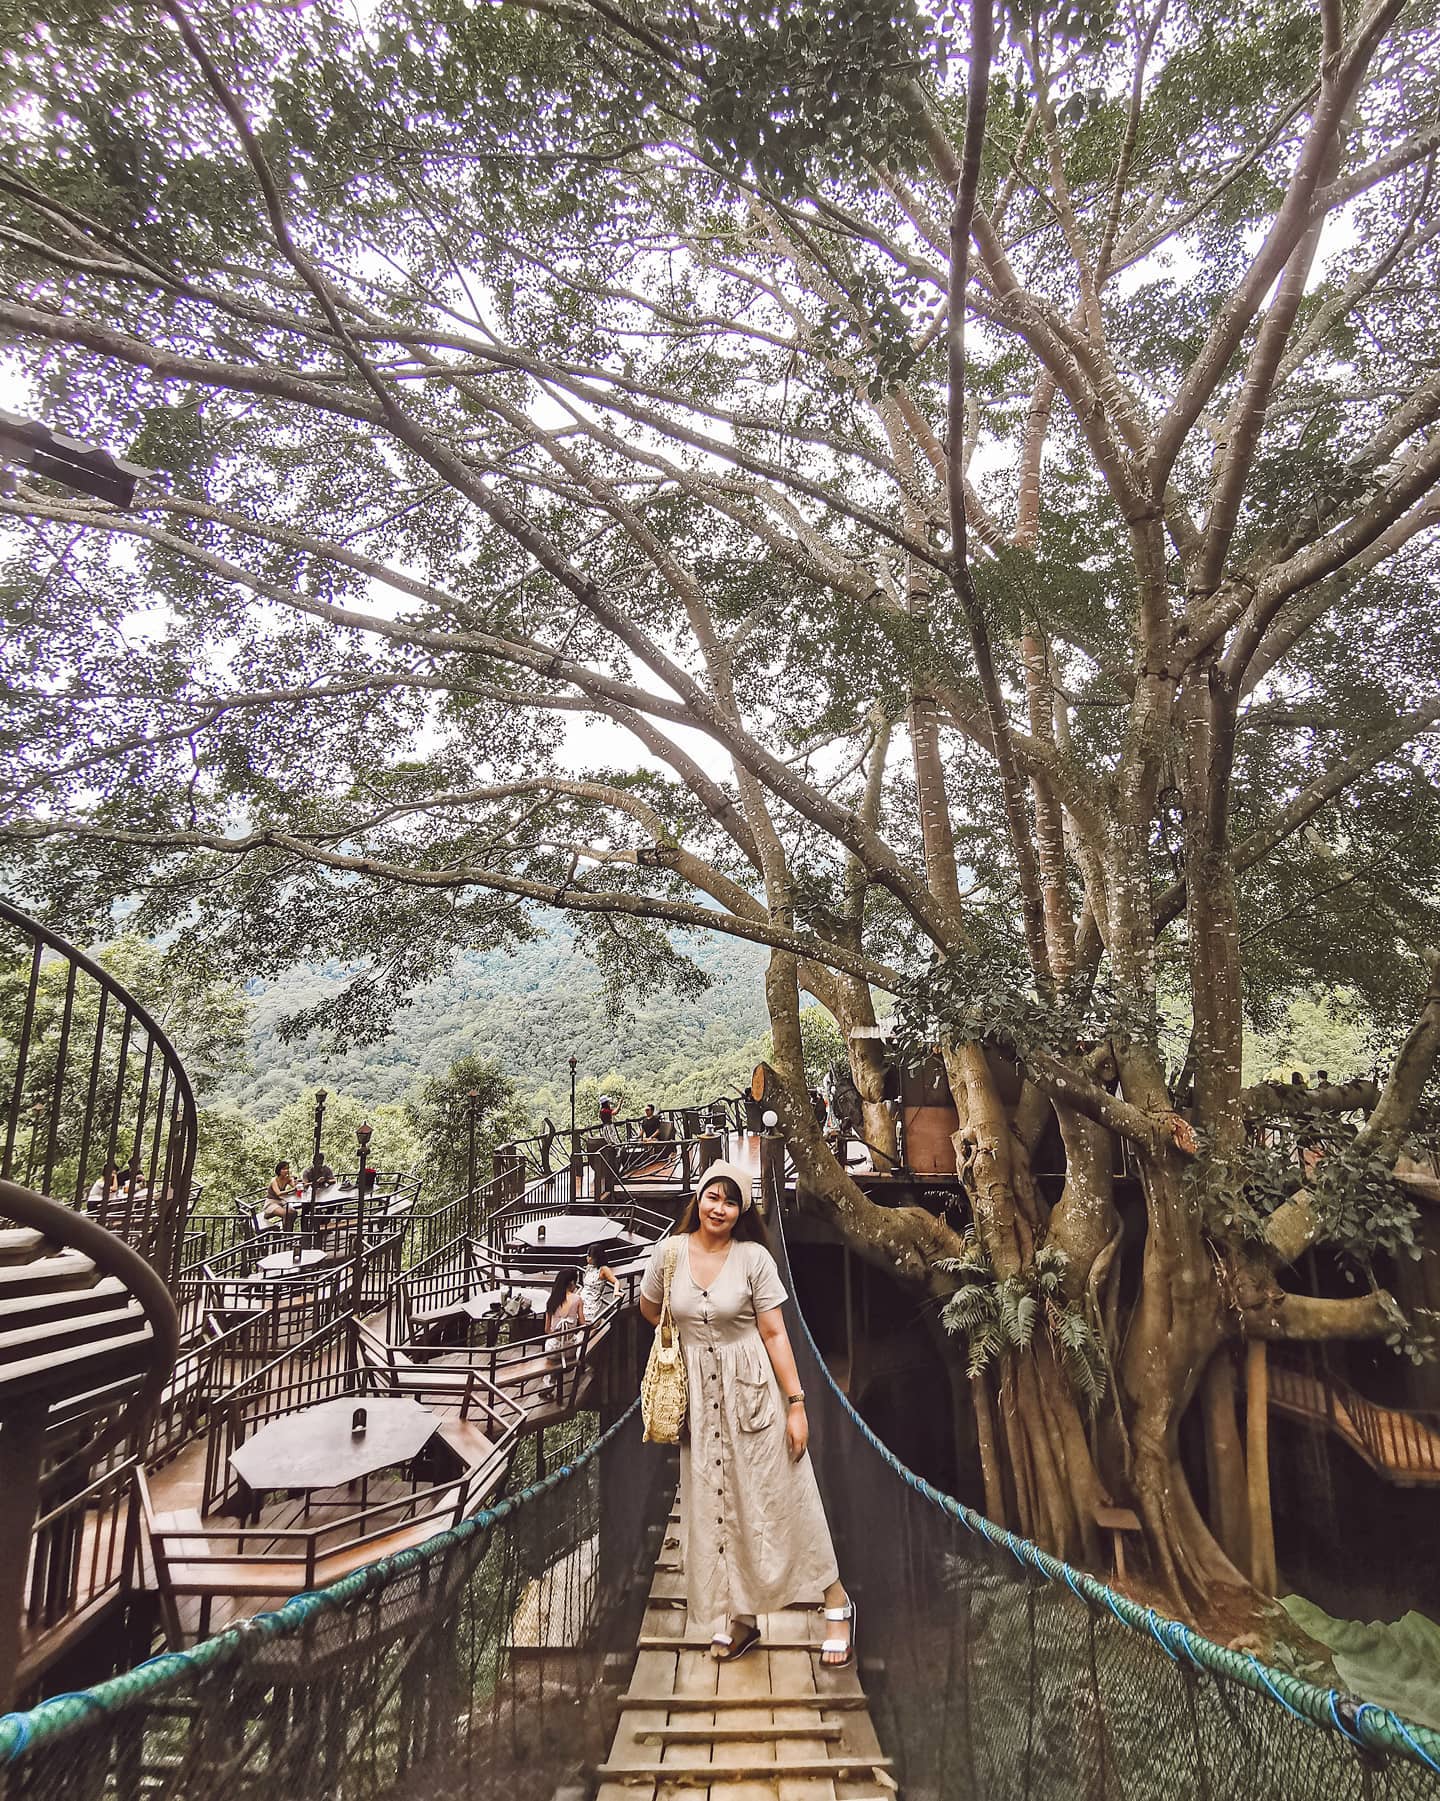 Experience the Giant Chiang Mai Tree Cafe